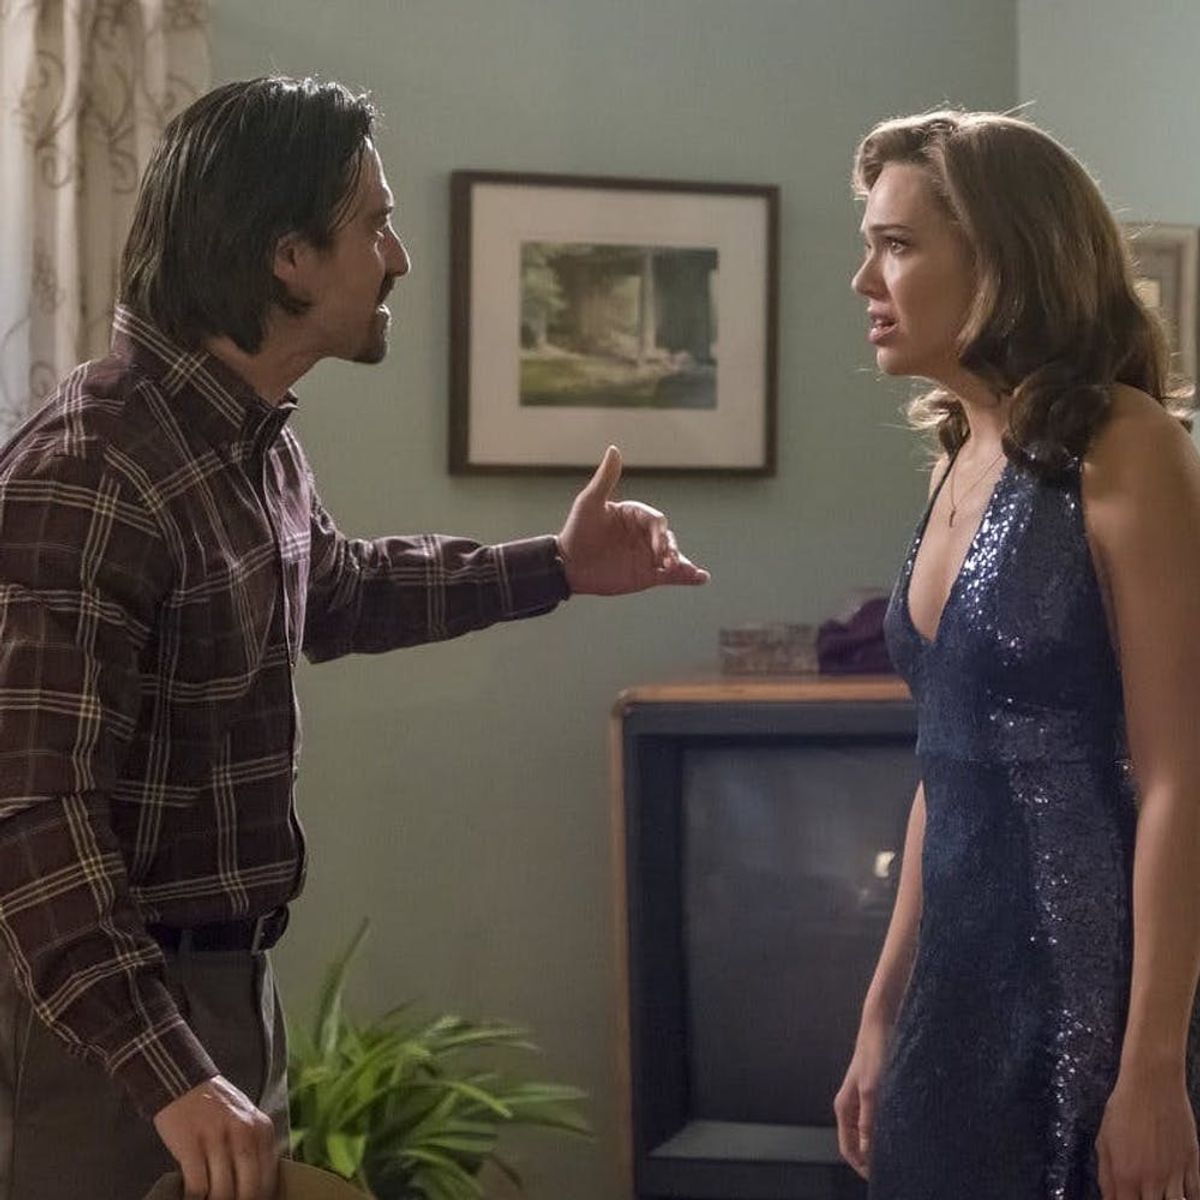 6 New Details About Season 2 of This Is Us (Including a Special Guest Star)